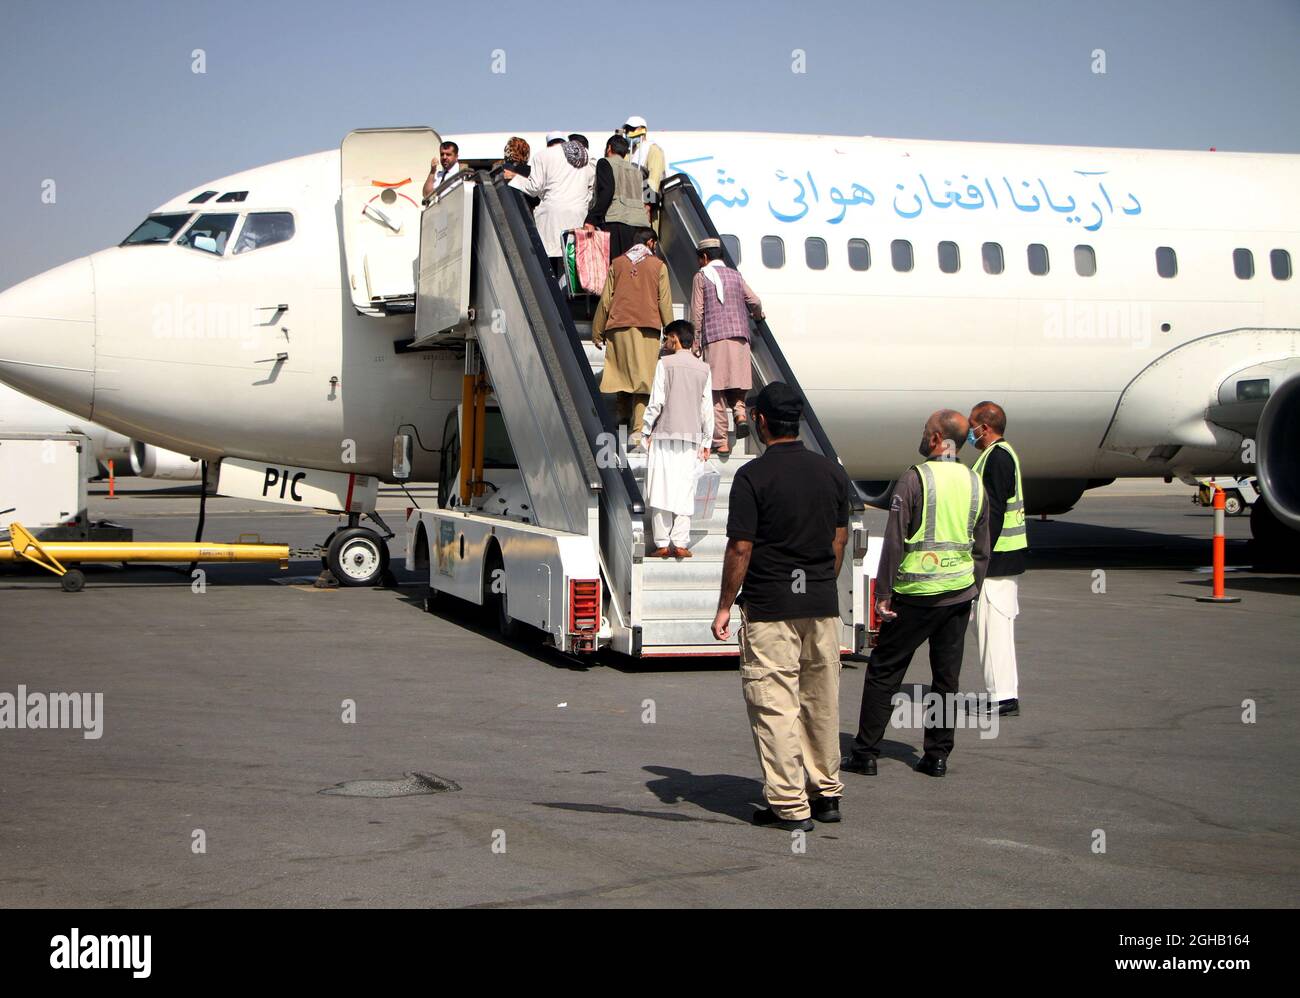 Kabul, Afghanistan. 6th Sep, 2021. Passengers board a plane at the airport in Kabul, capital of Afghanistan, Sept. 6, 2021. Afghanistan's flag carrier airline Ariana Afghan Airlines has resumed domestic flights, a local television channel reported Sunday. Credit: Saifurahman Safi/Xinhua/Alamy Live News Stock Photo